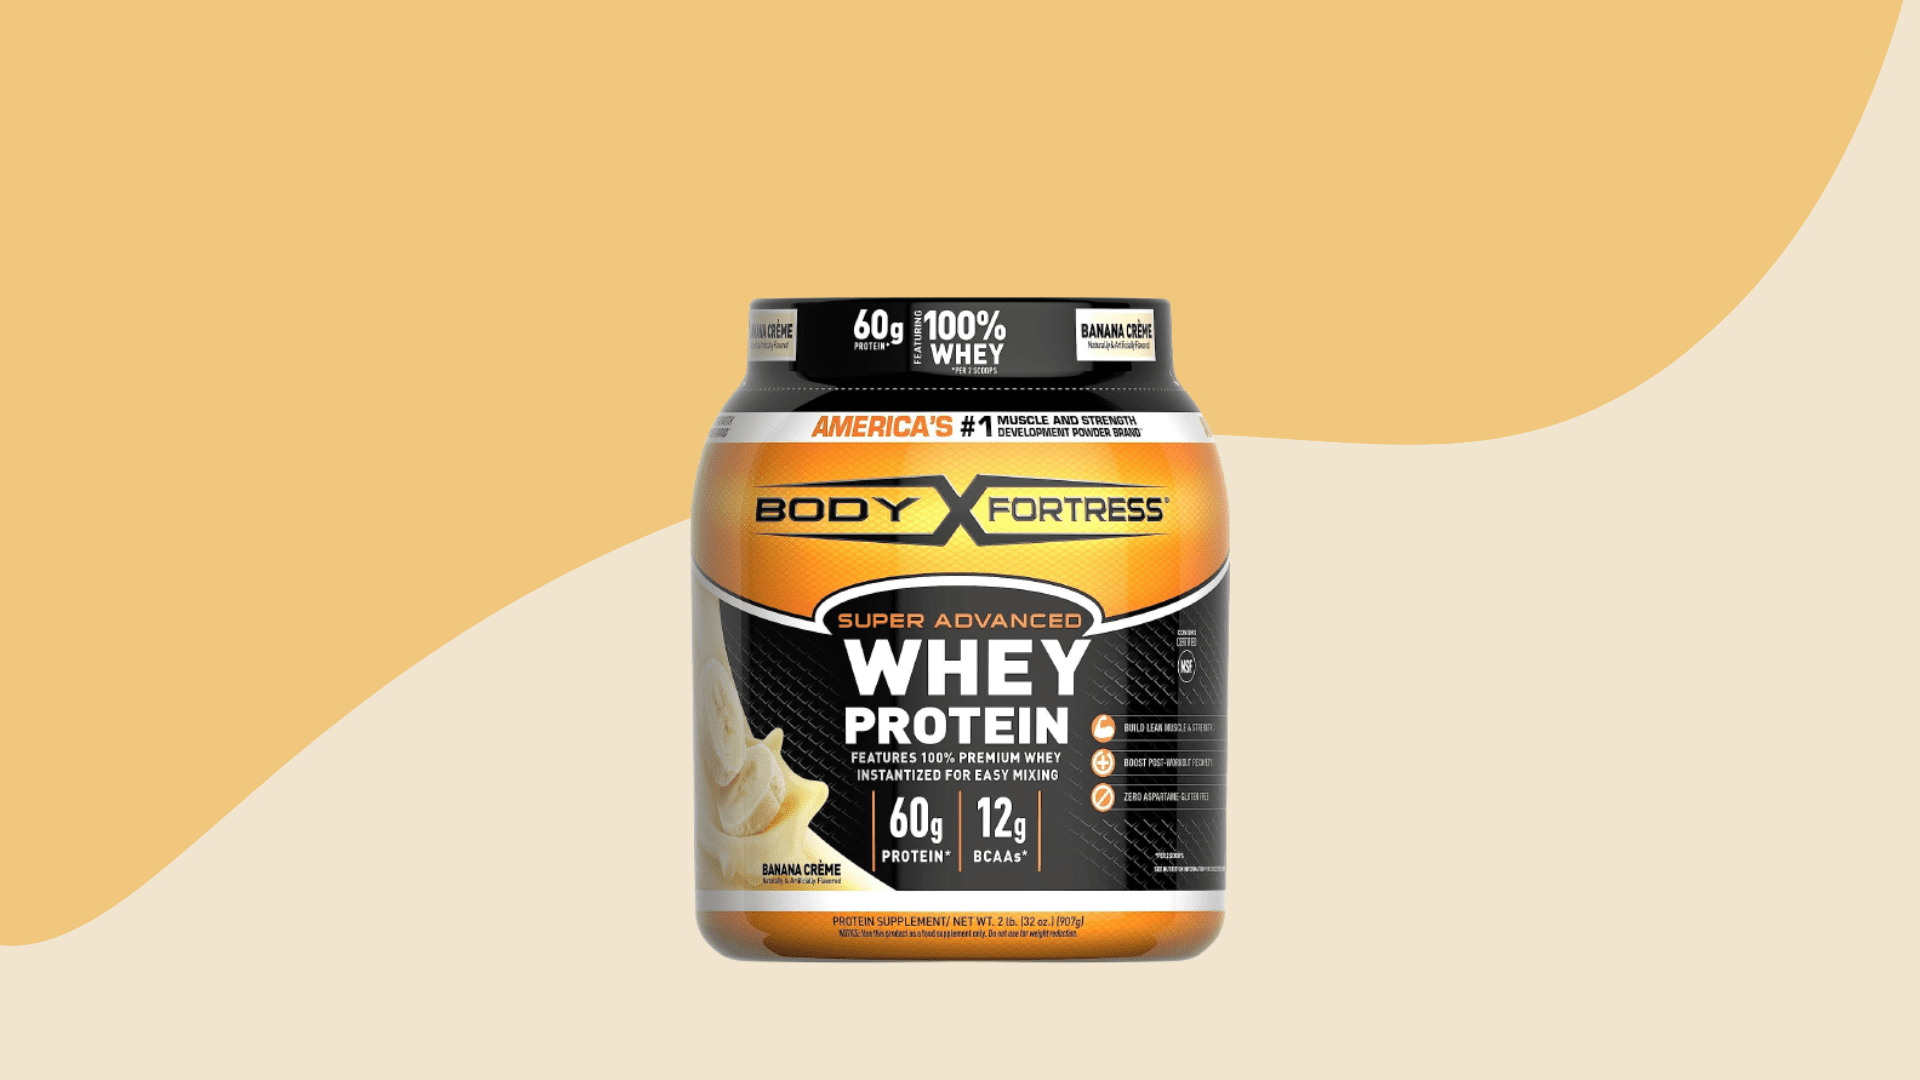 Body Fortress Whey Protein Supplement in Center